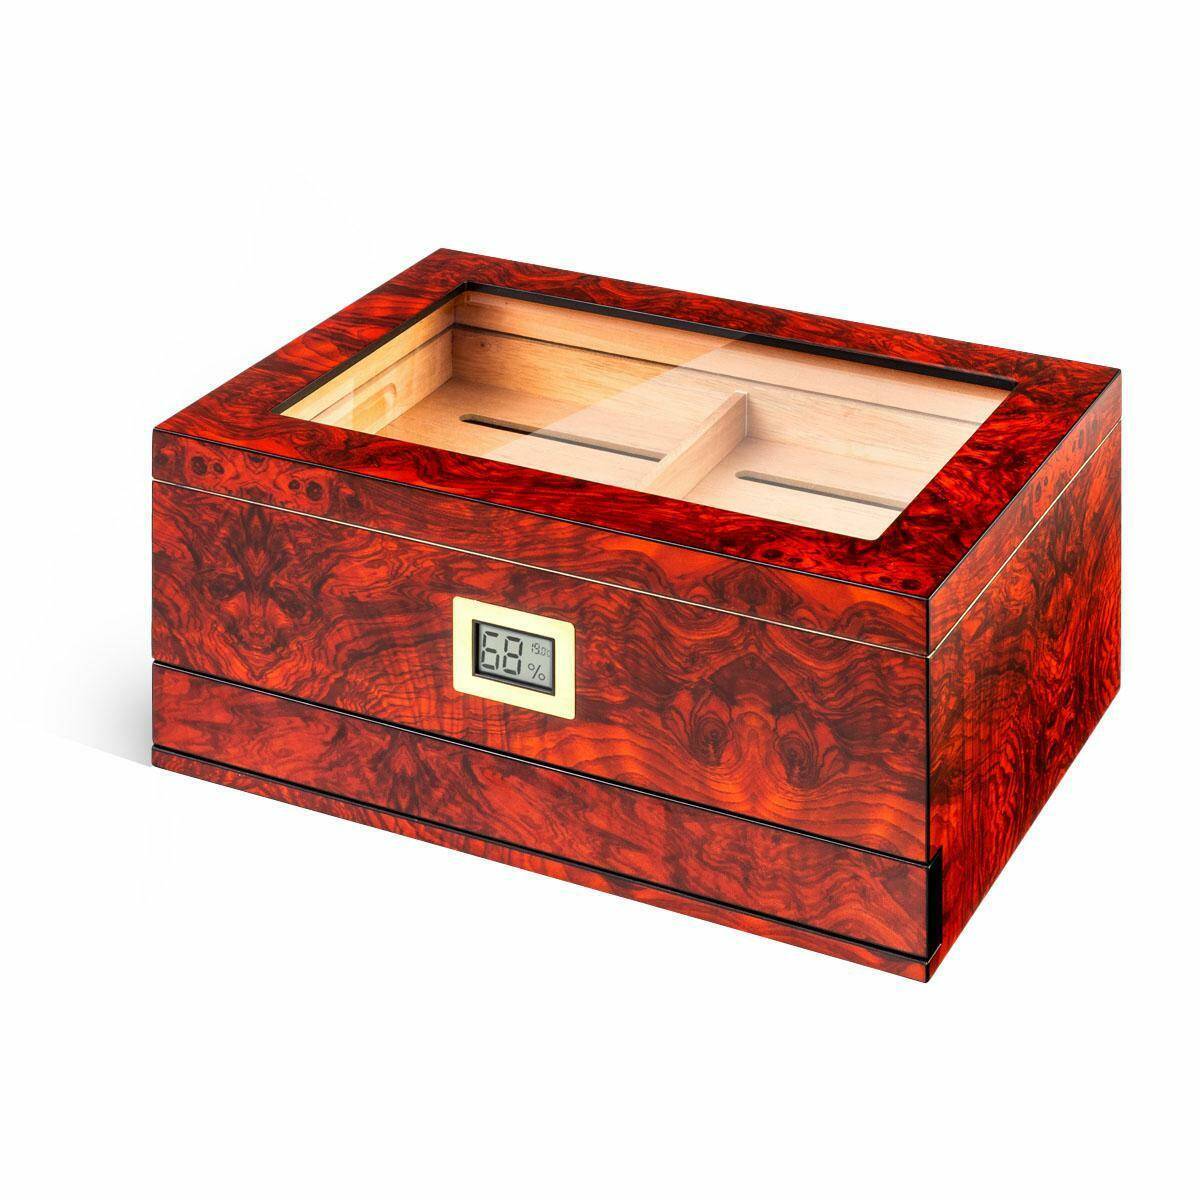 SEL-Humidor with ashtray and cutter